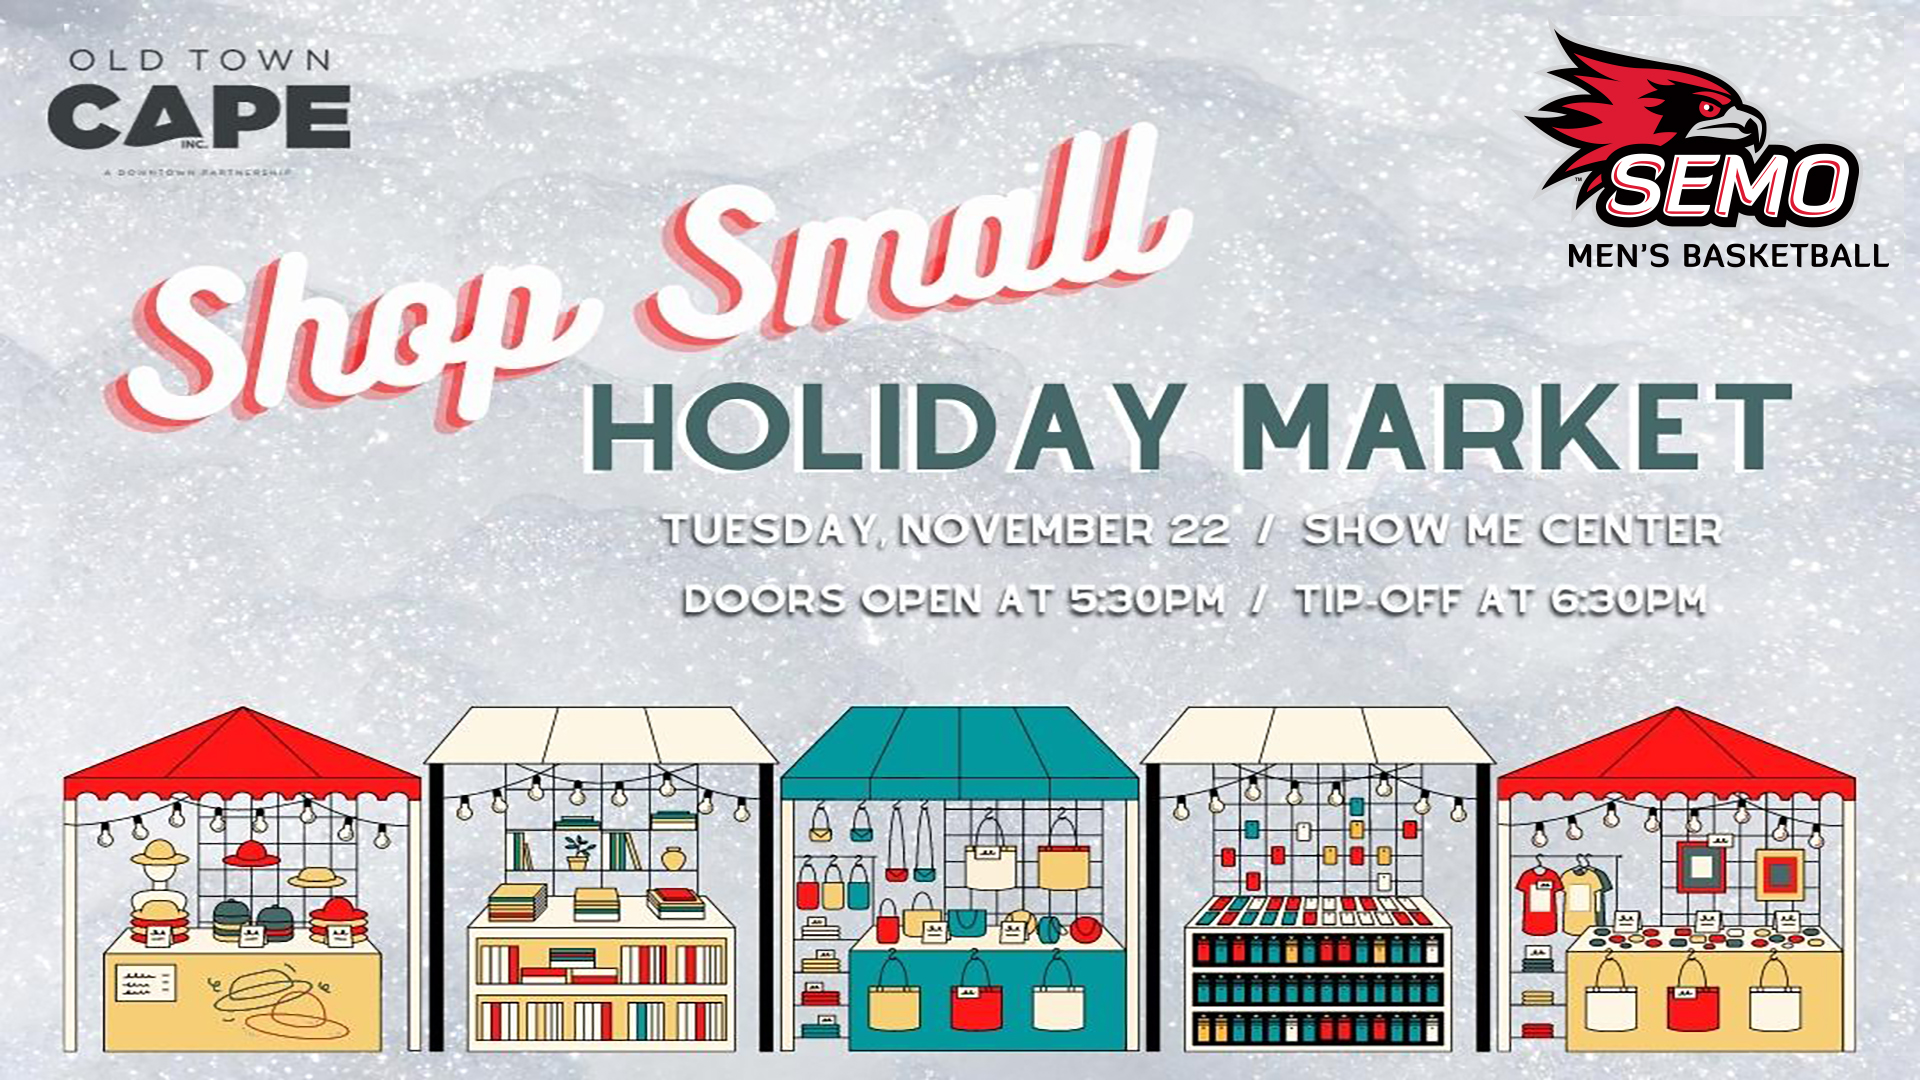 Shop Small Holiday Market Commercial Slide (1)